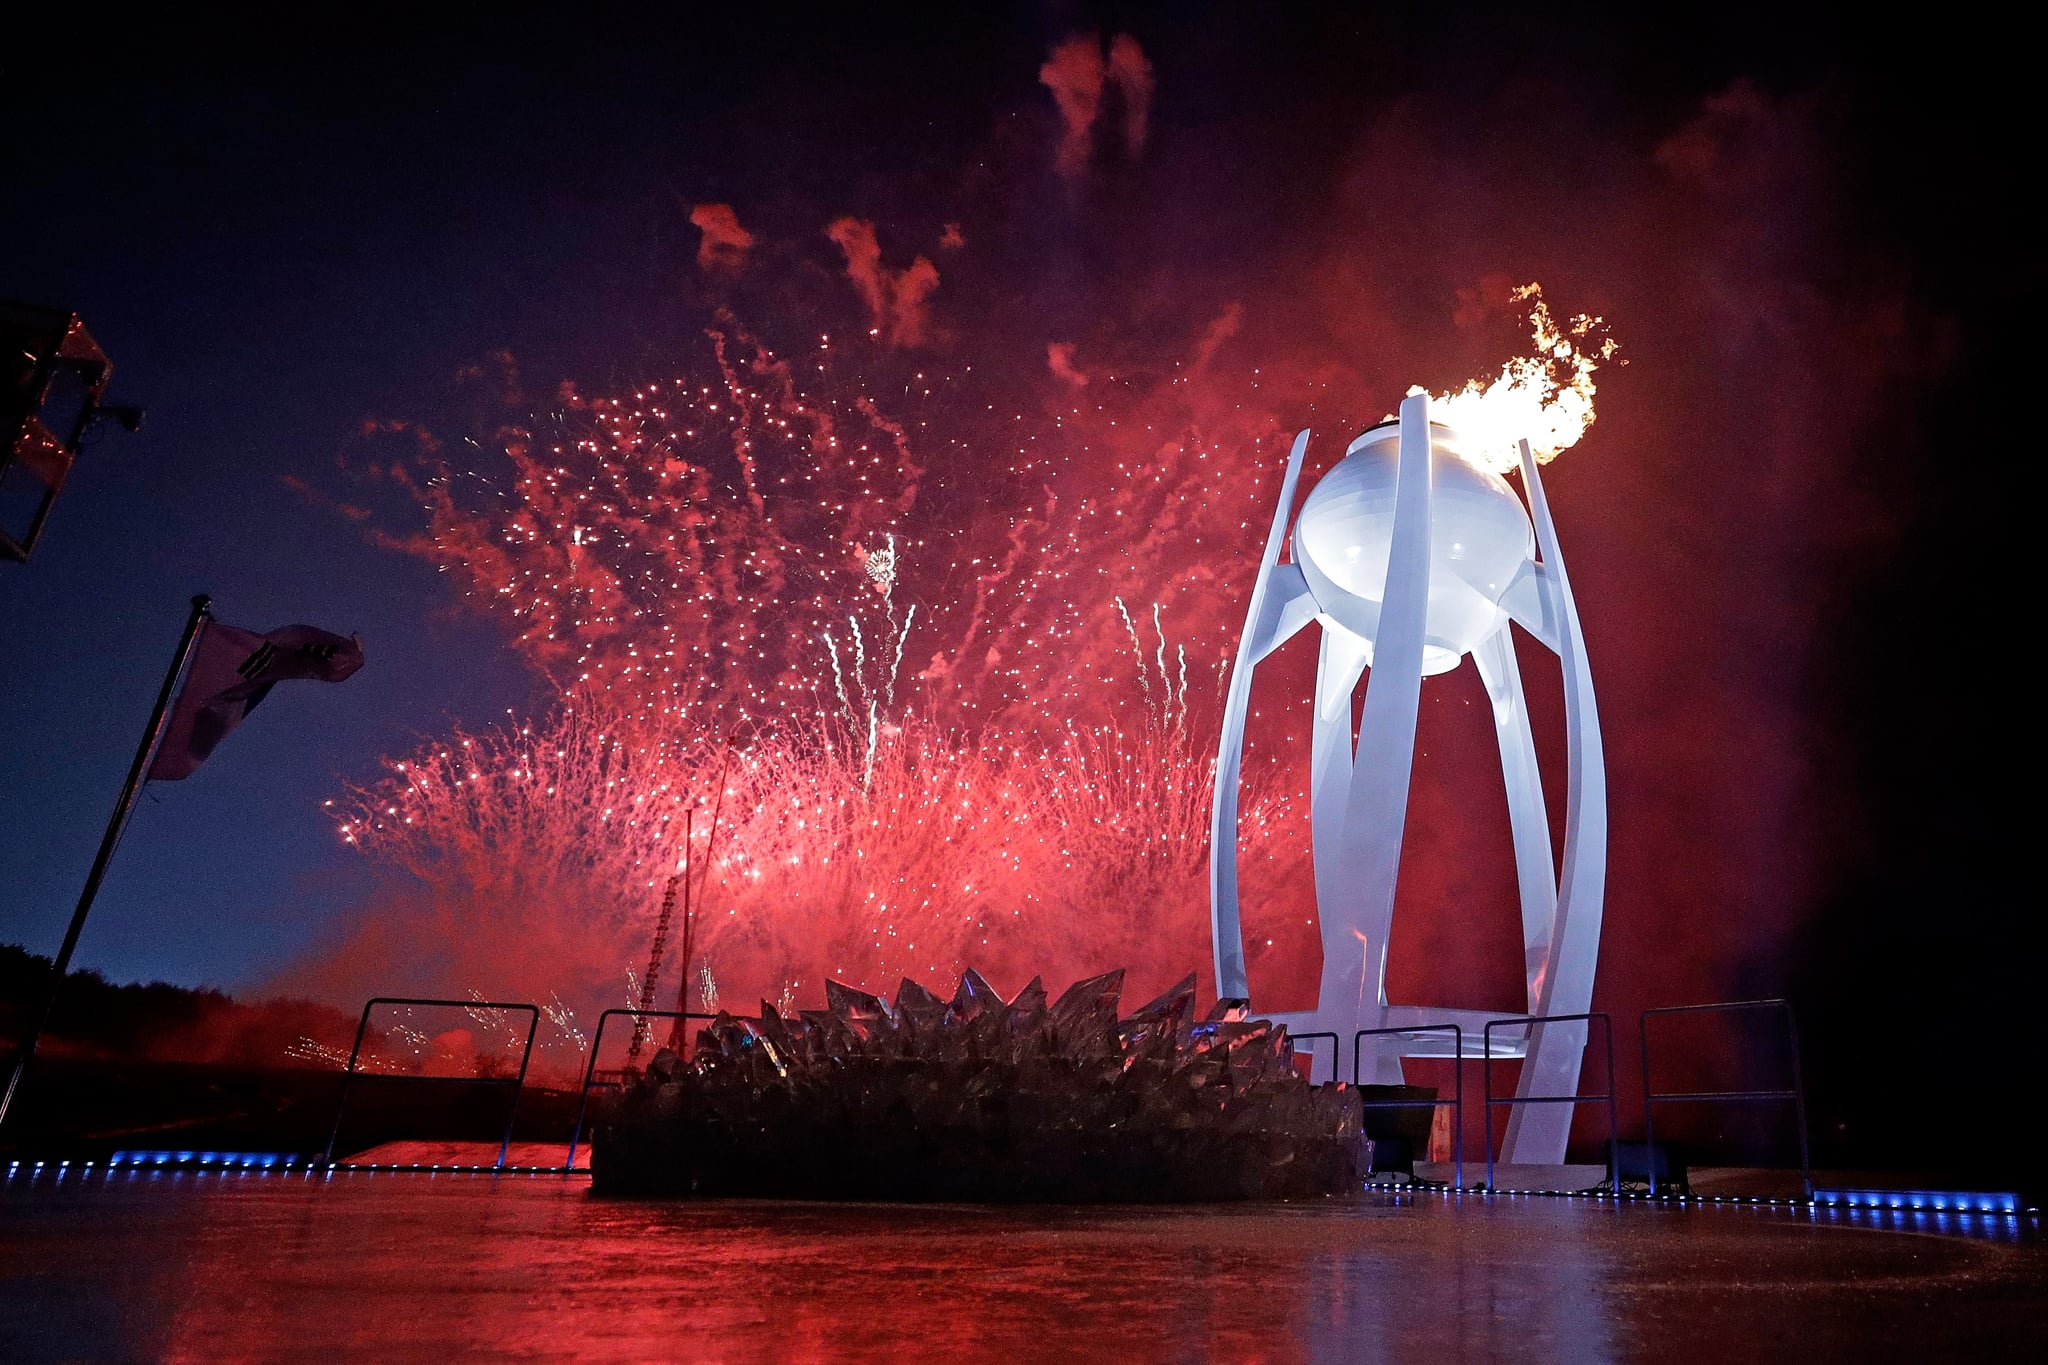 PYEONGCHANG-GUN, SOUTH KOREA - FEBRUARY 09:  Fireworks erupt as the Olympic Cauldron is lit during the Opening Ceremony of the PyeongChang 2018 Winter Olympic Games at PyeongChang Olympic Stadium on February 9, 2018 in Pyeongchang-gun, South Korea.  (Photo by Pool - David J. Phillip/Getty Images)